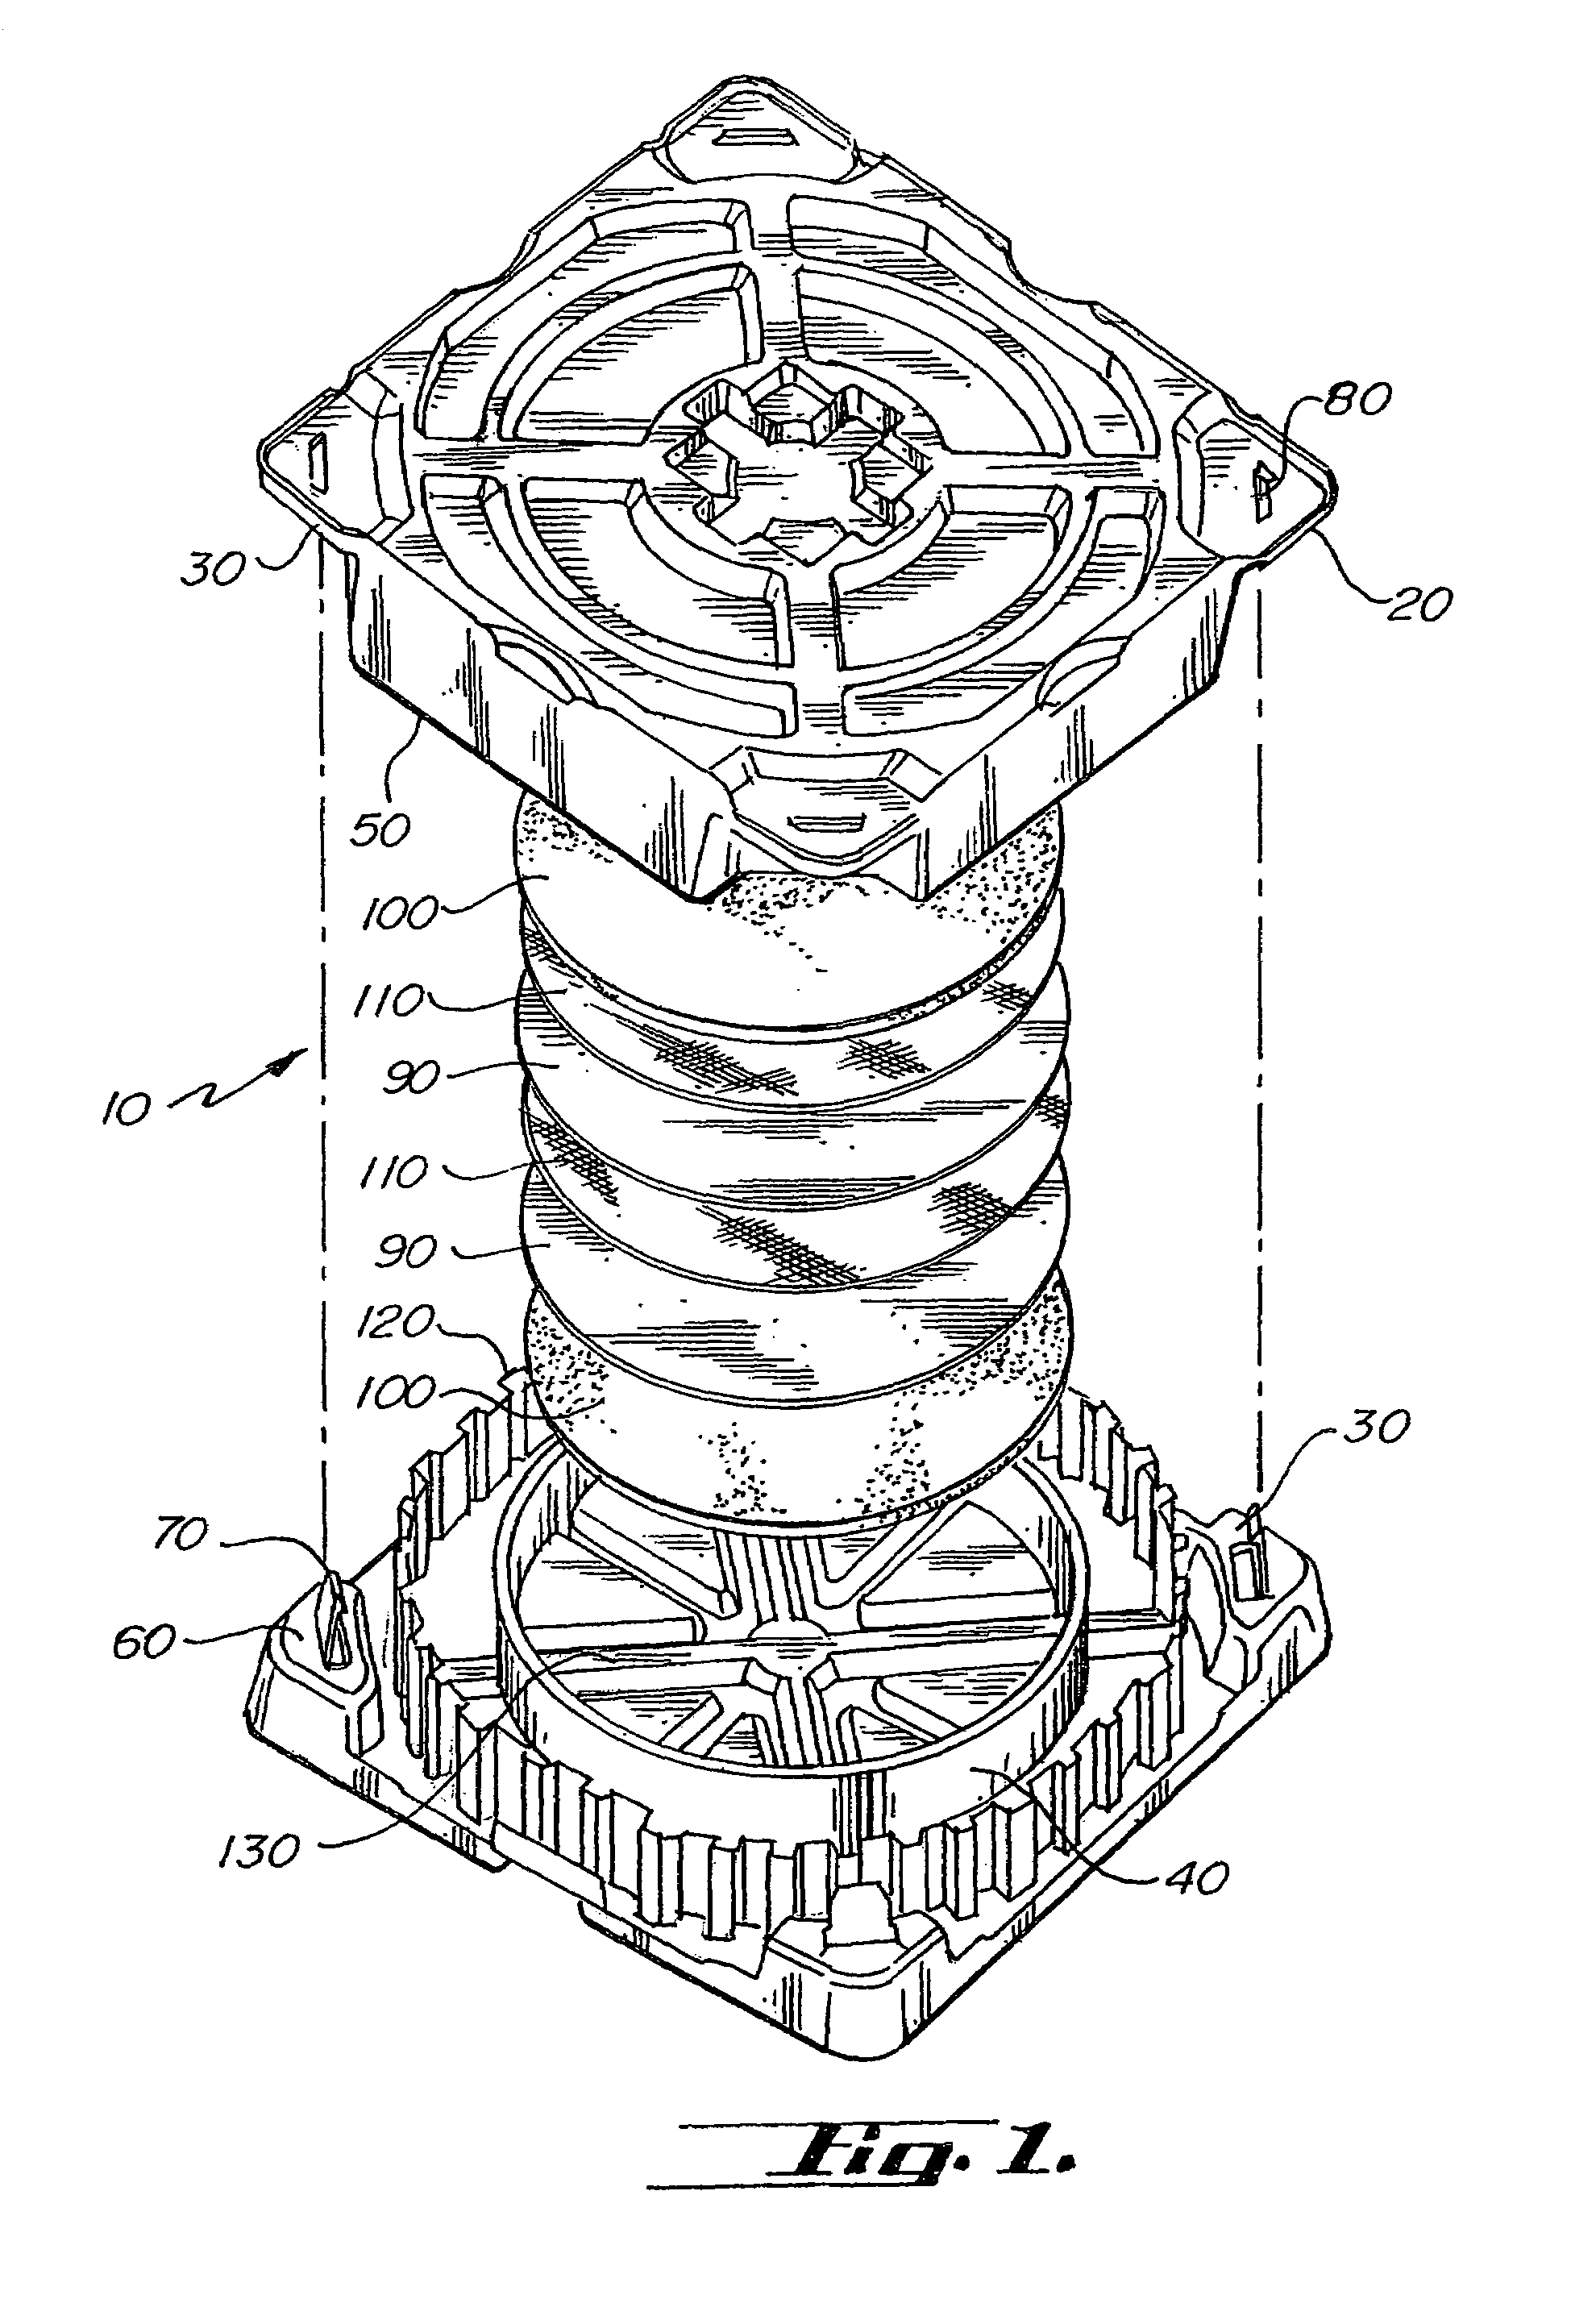 System for cushioning wafer in wafer carrier